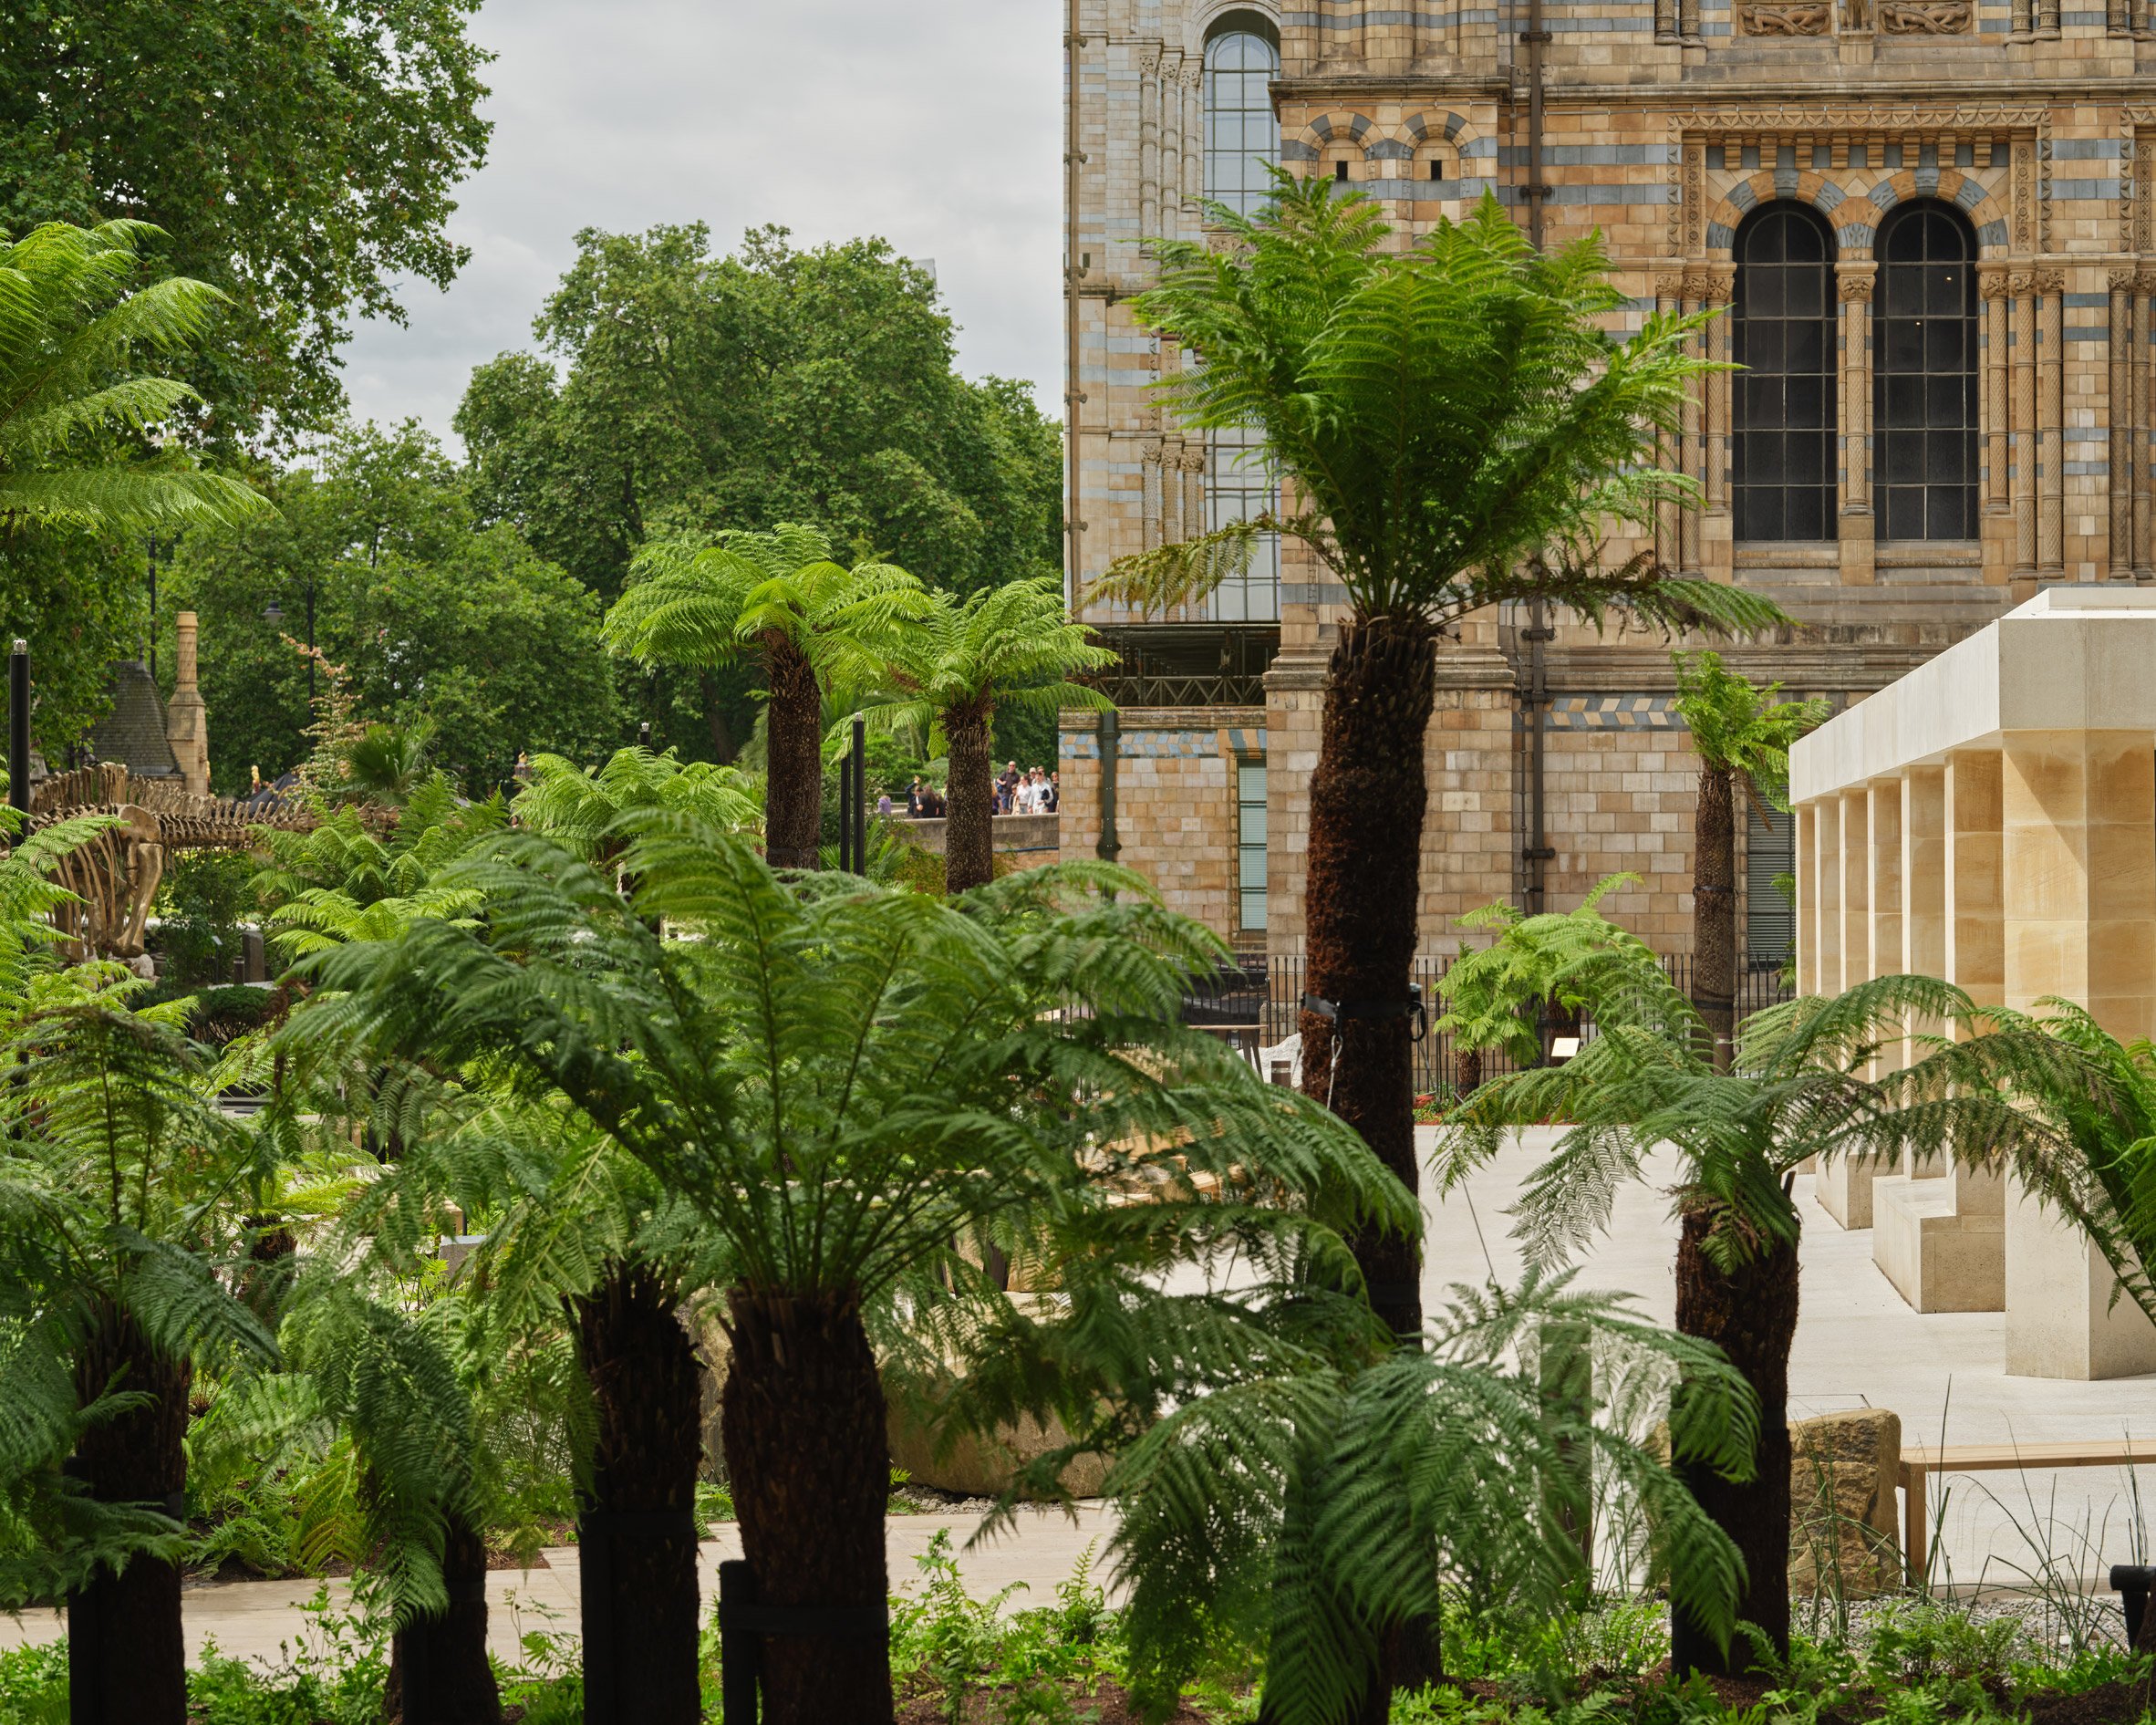 The Natural History Museum gardens by Feilden Fowles and J&L Gibbons